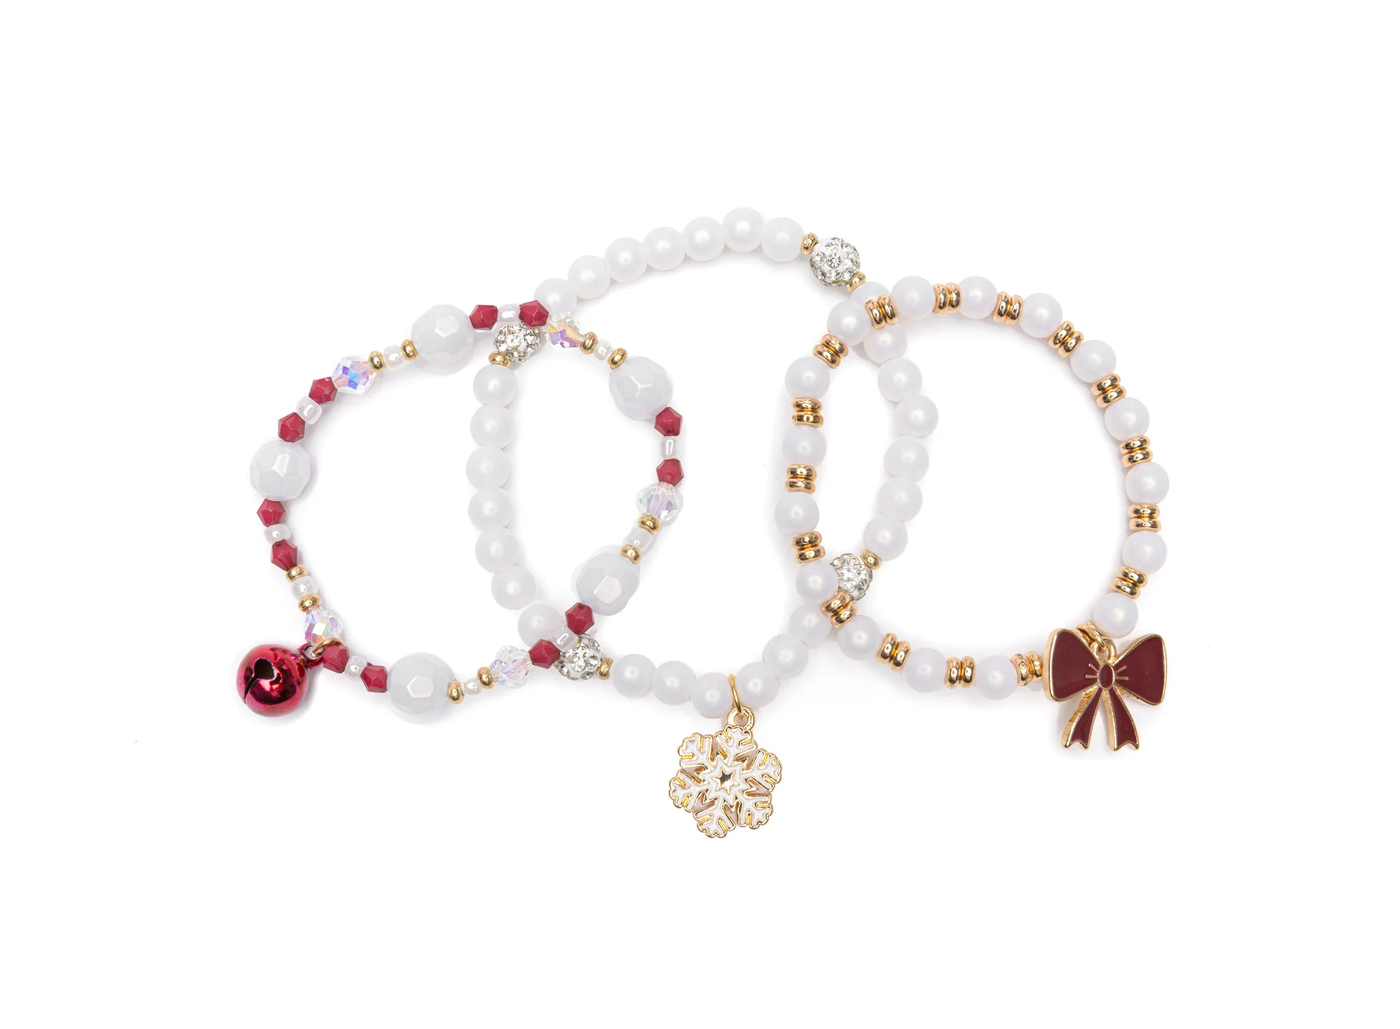 Assorted Holiday Bracelets (sold separately)